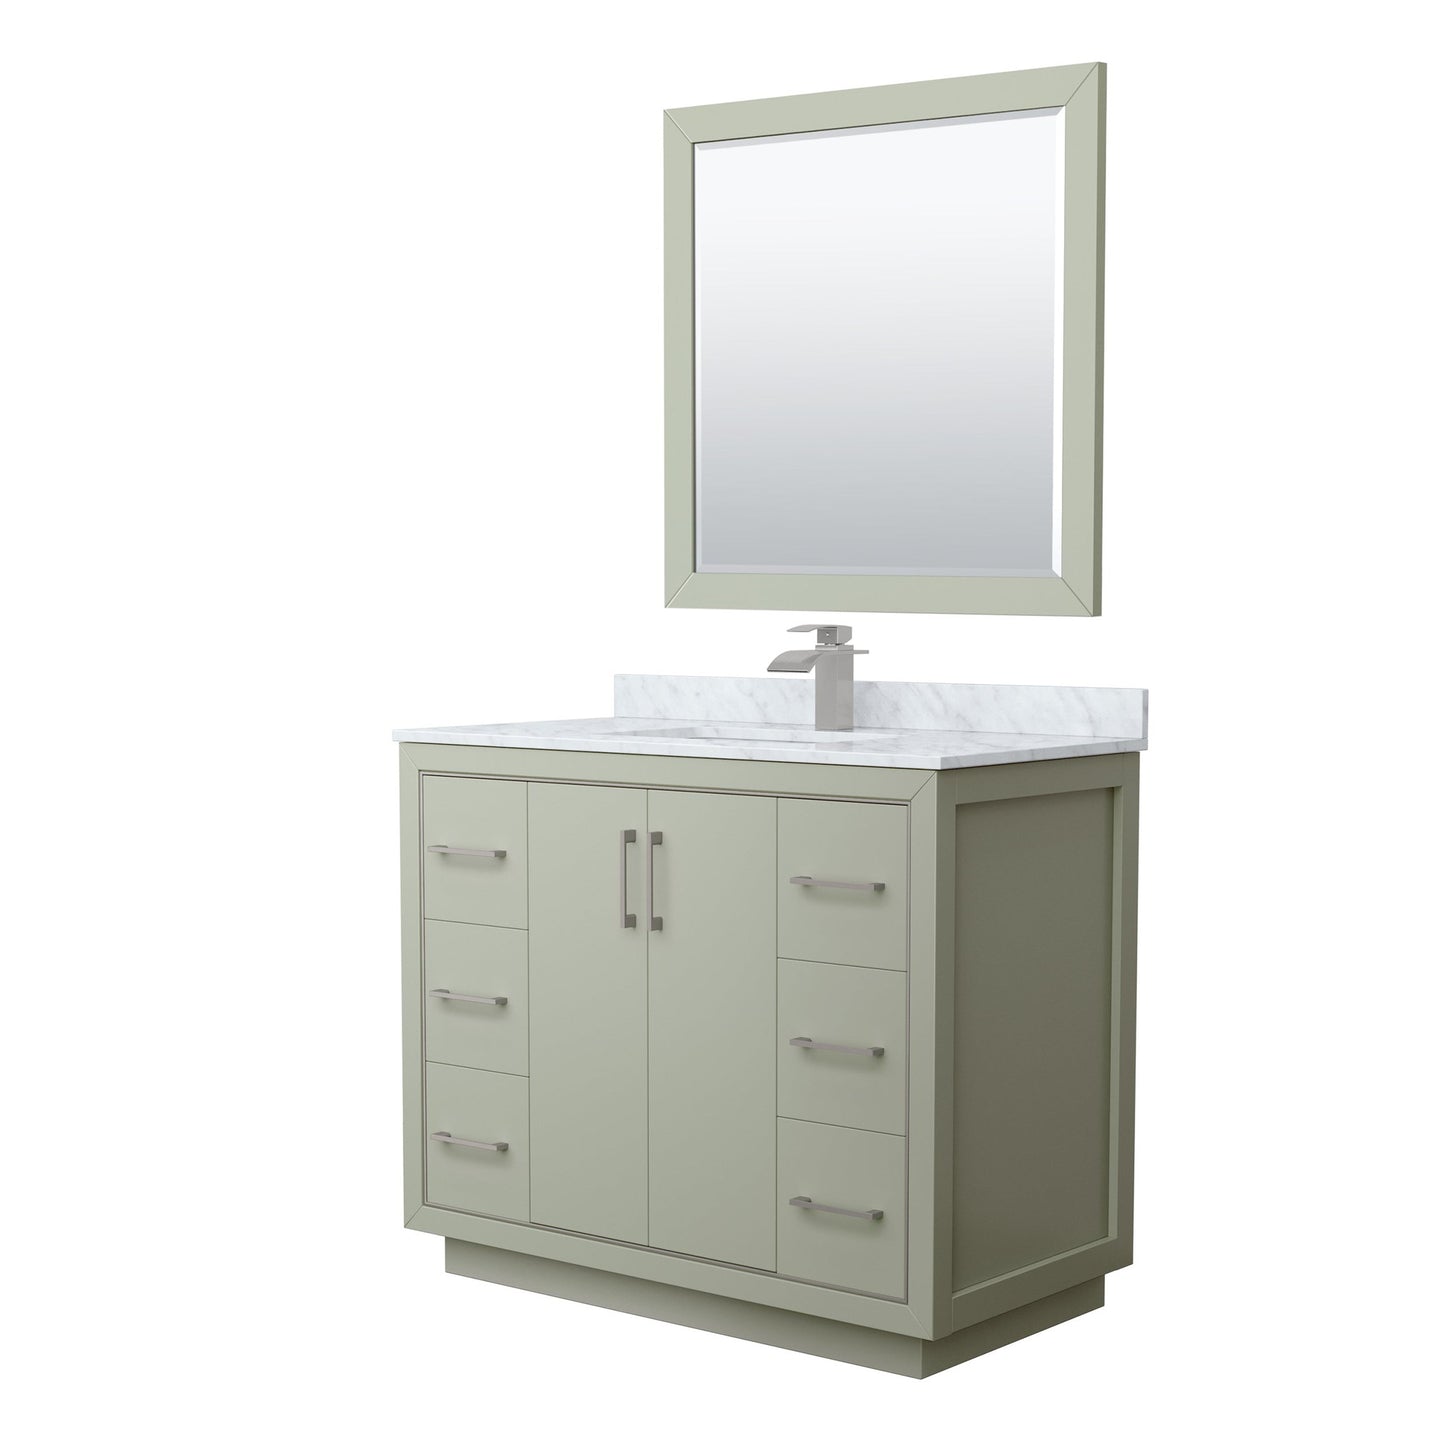 Wyndham Collection Icon 42" Single Bathroom Vanity in Light Green, White Carrara Marble Countertop, Undermount Square Sink, Brushed Nickel Trim, 34" Mirror